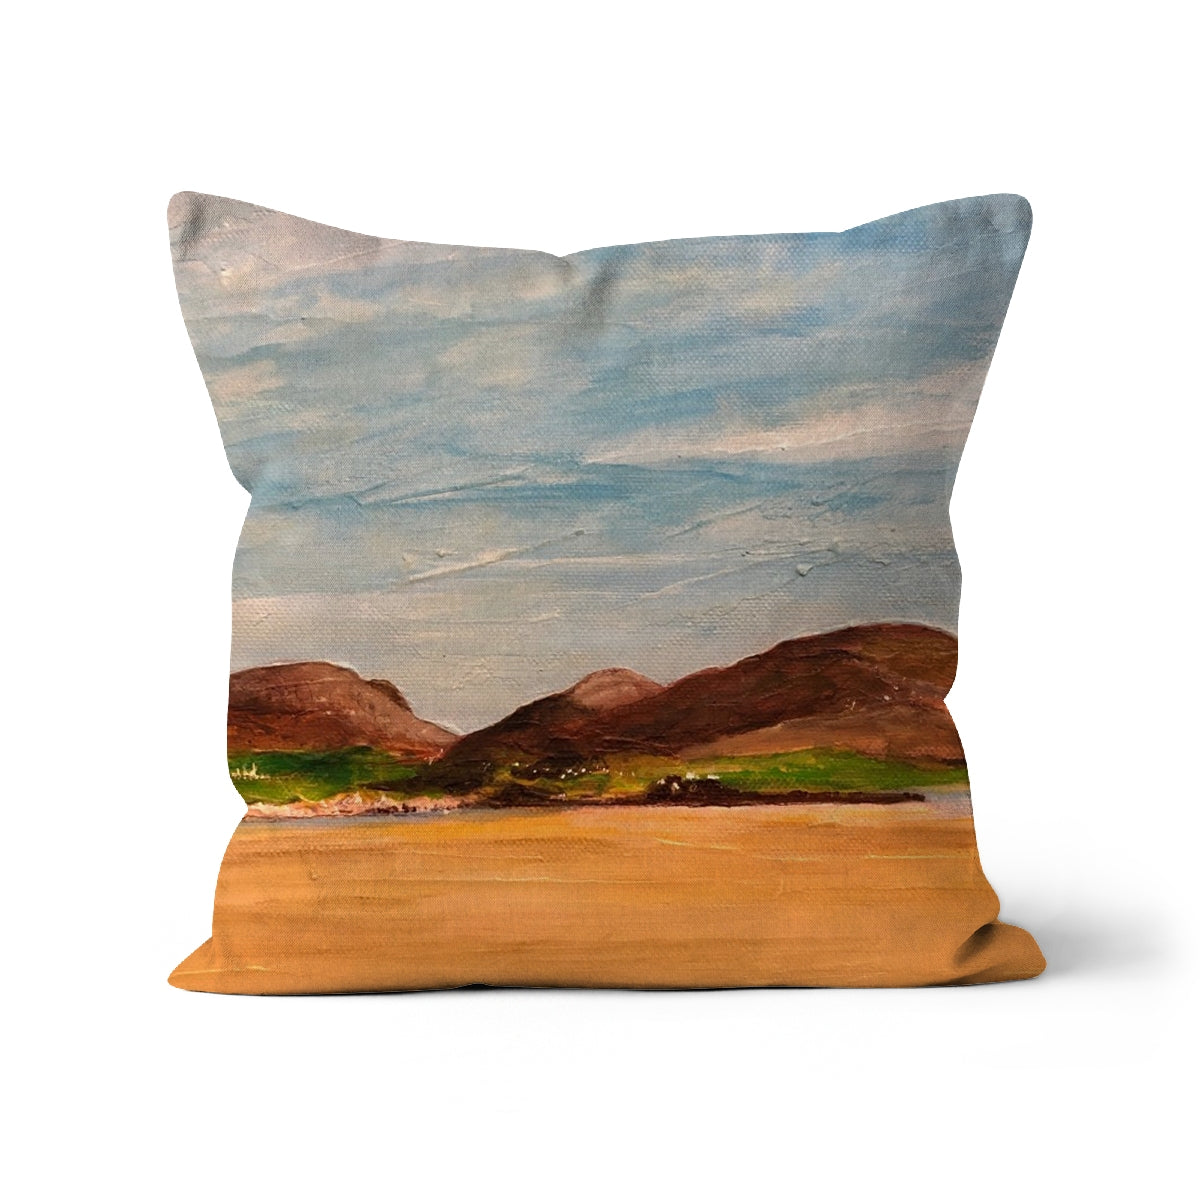 Uig Sands Lewis Art Gifts Cushion-Cushions-Hebridean Islands Art Gallery-Canvas-16"x16"-Paintings, Prints, Homeware, Art Gifts From Scotland By Scottish Artist Kevin Hunter